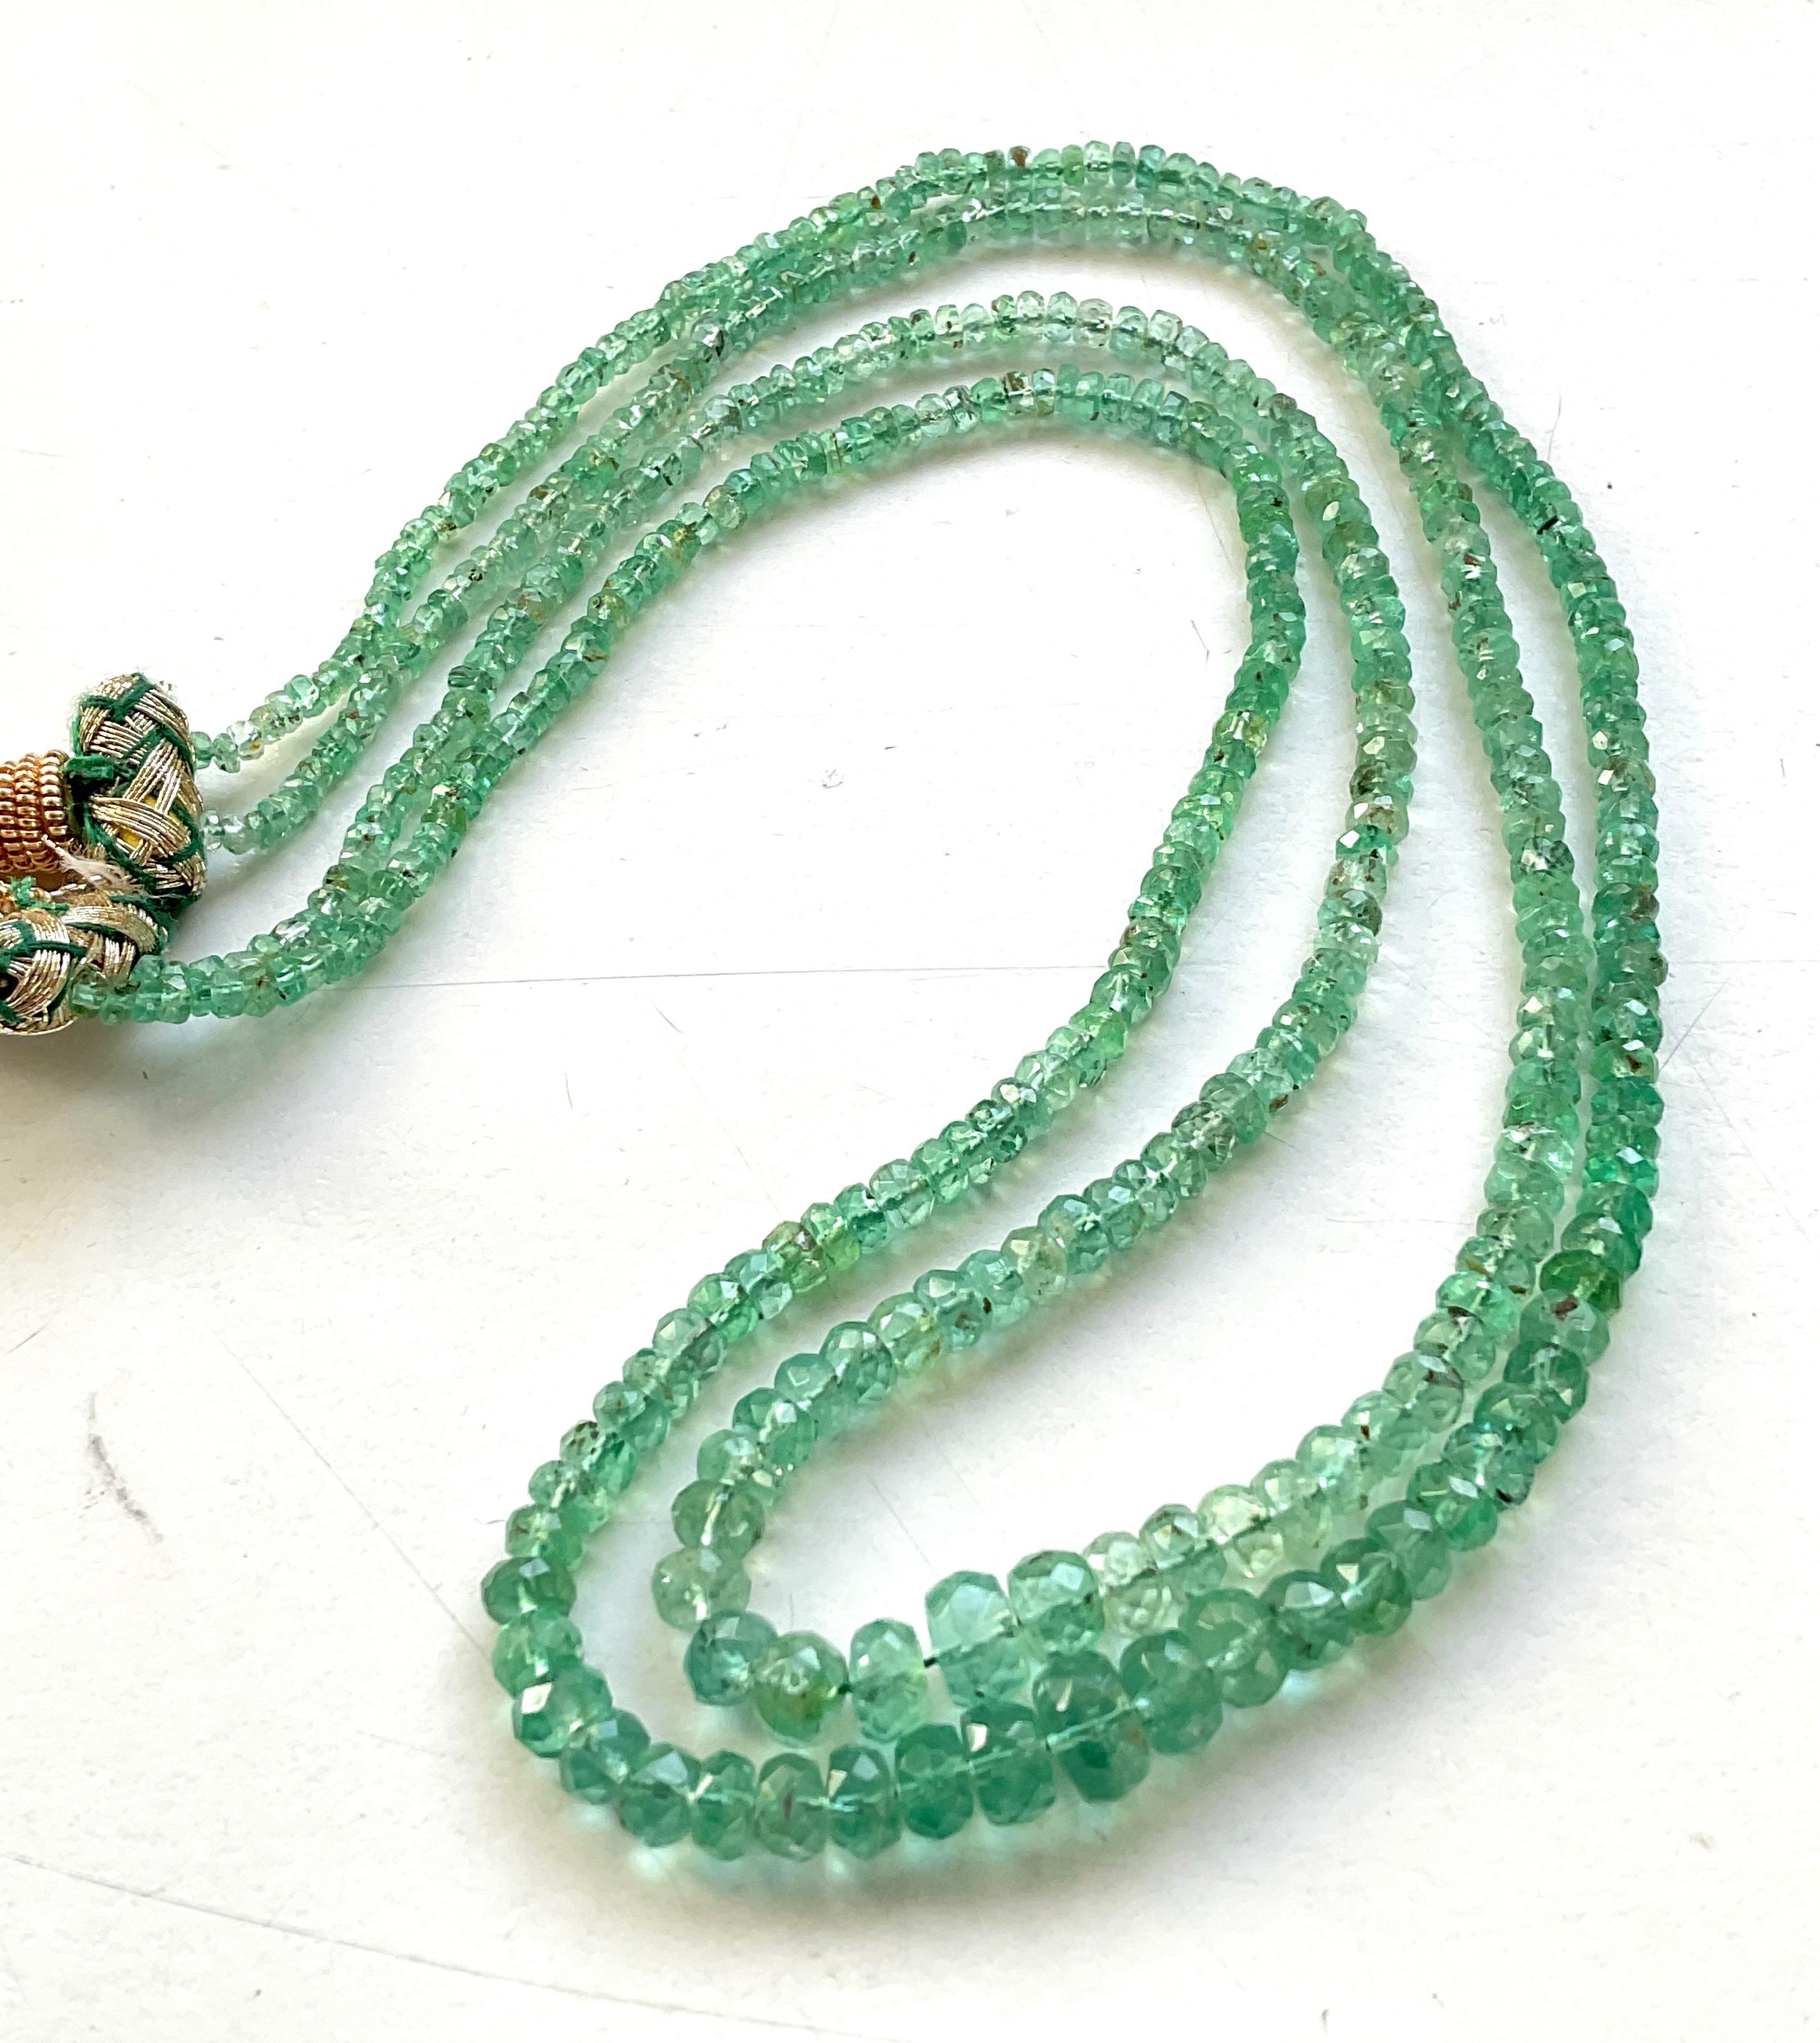 65.30 Carats Panjshir Emerald Faceted Beads For Fine Jewelry Natural Gemstone
Gemstone - Emerald
Weight - 65.30 carats
Shape - Beads
Size - 2.5 To 5 MM
Quantity - 2 line